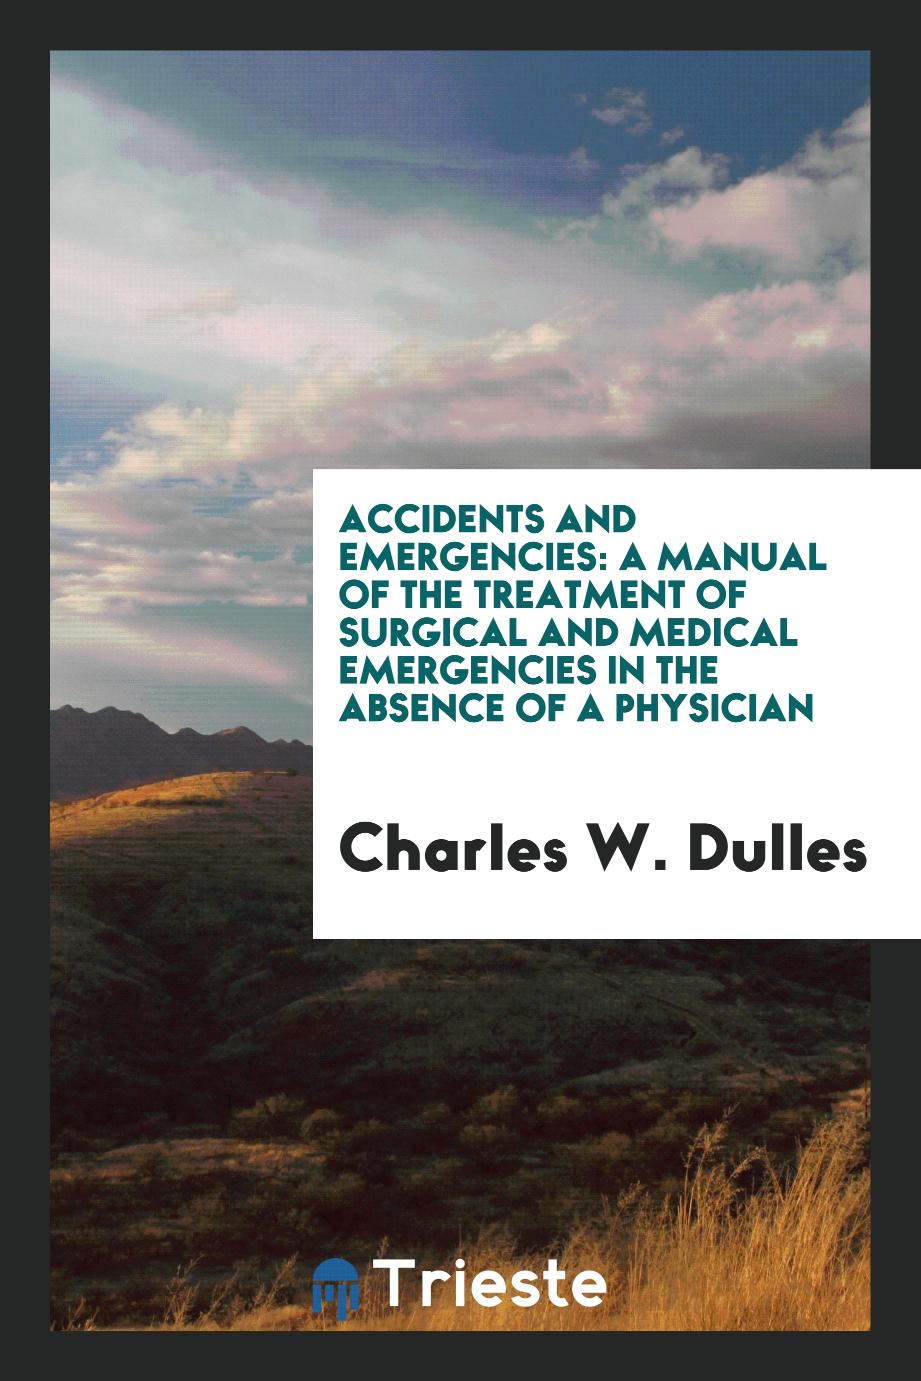 Accidents and Emergencies: A Manual of the Treatment of Surgical and Medical Emergencies in the Absence of a Physician